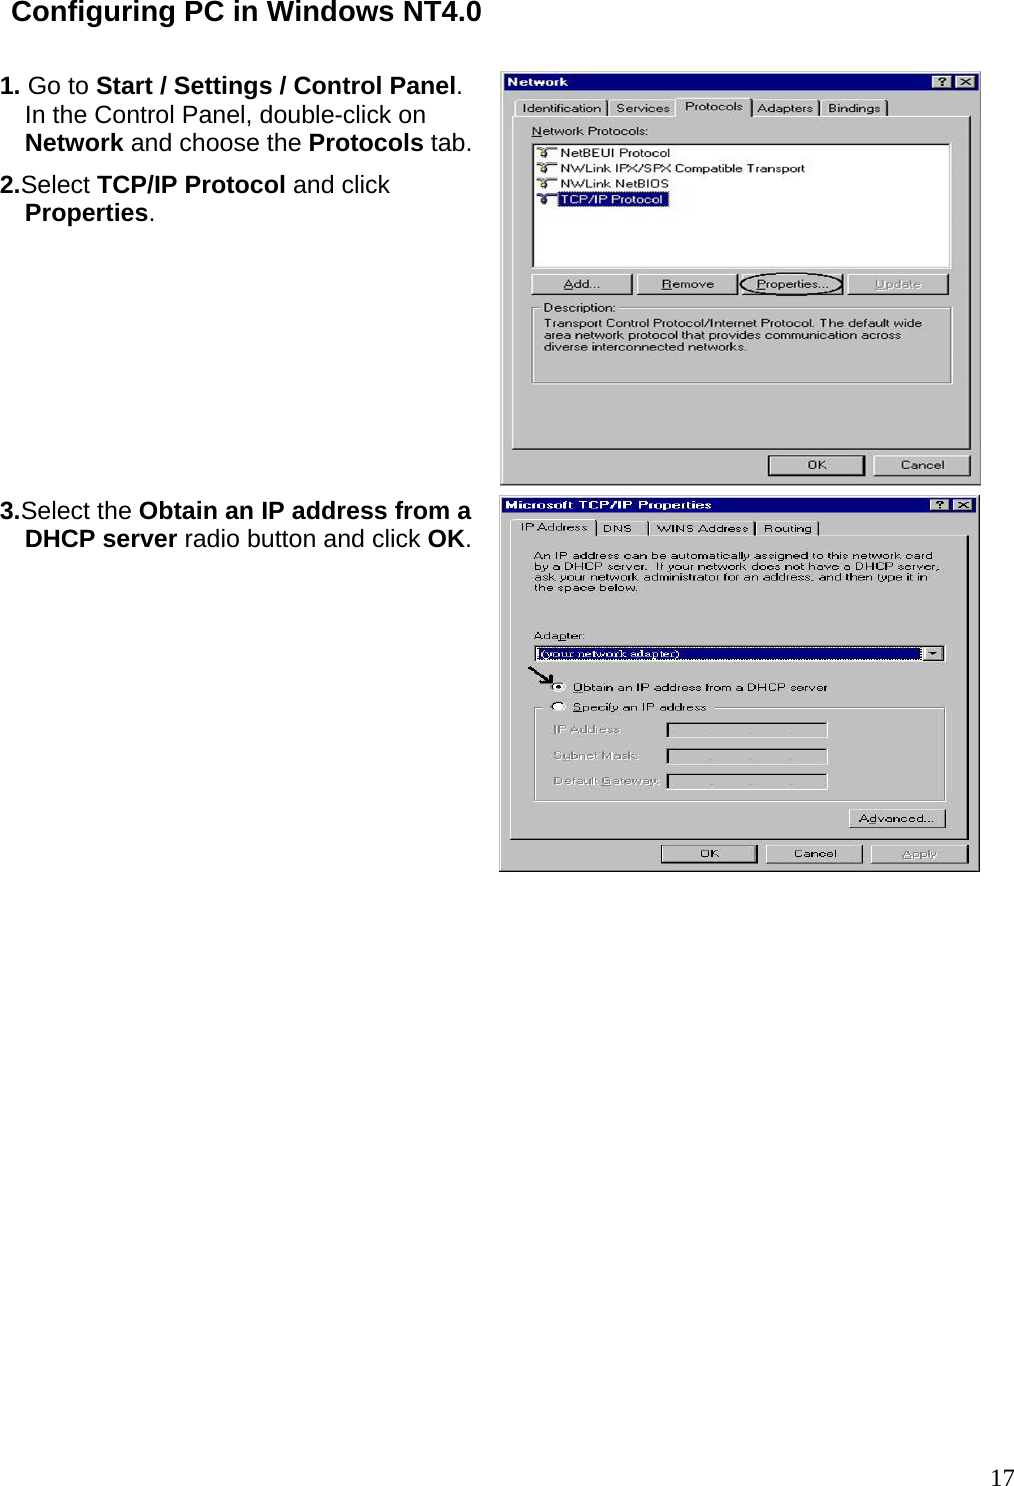 Configuring PC in Windows NT4.0  1. Go to Start / Settings / Control Panel. In the Control Panel, double-click on Network and choose the Protocols tab.2.Select TCP/IP Protocol and click Properties.  3.Select the Obtain an IP address from a DHCP server radio button and click OK.                17